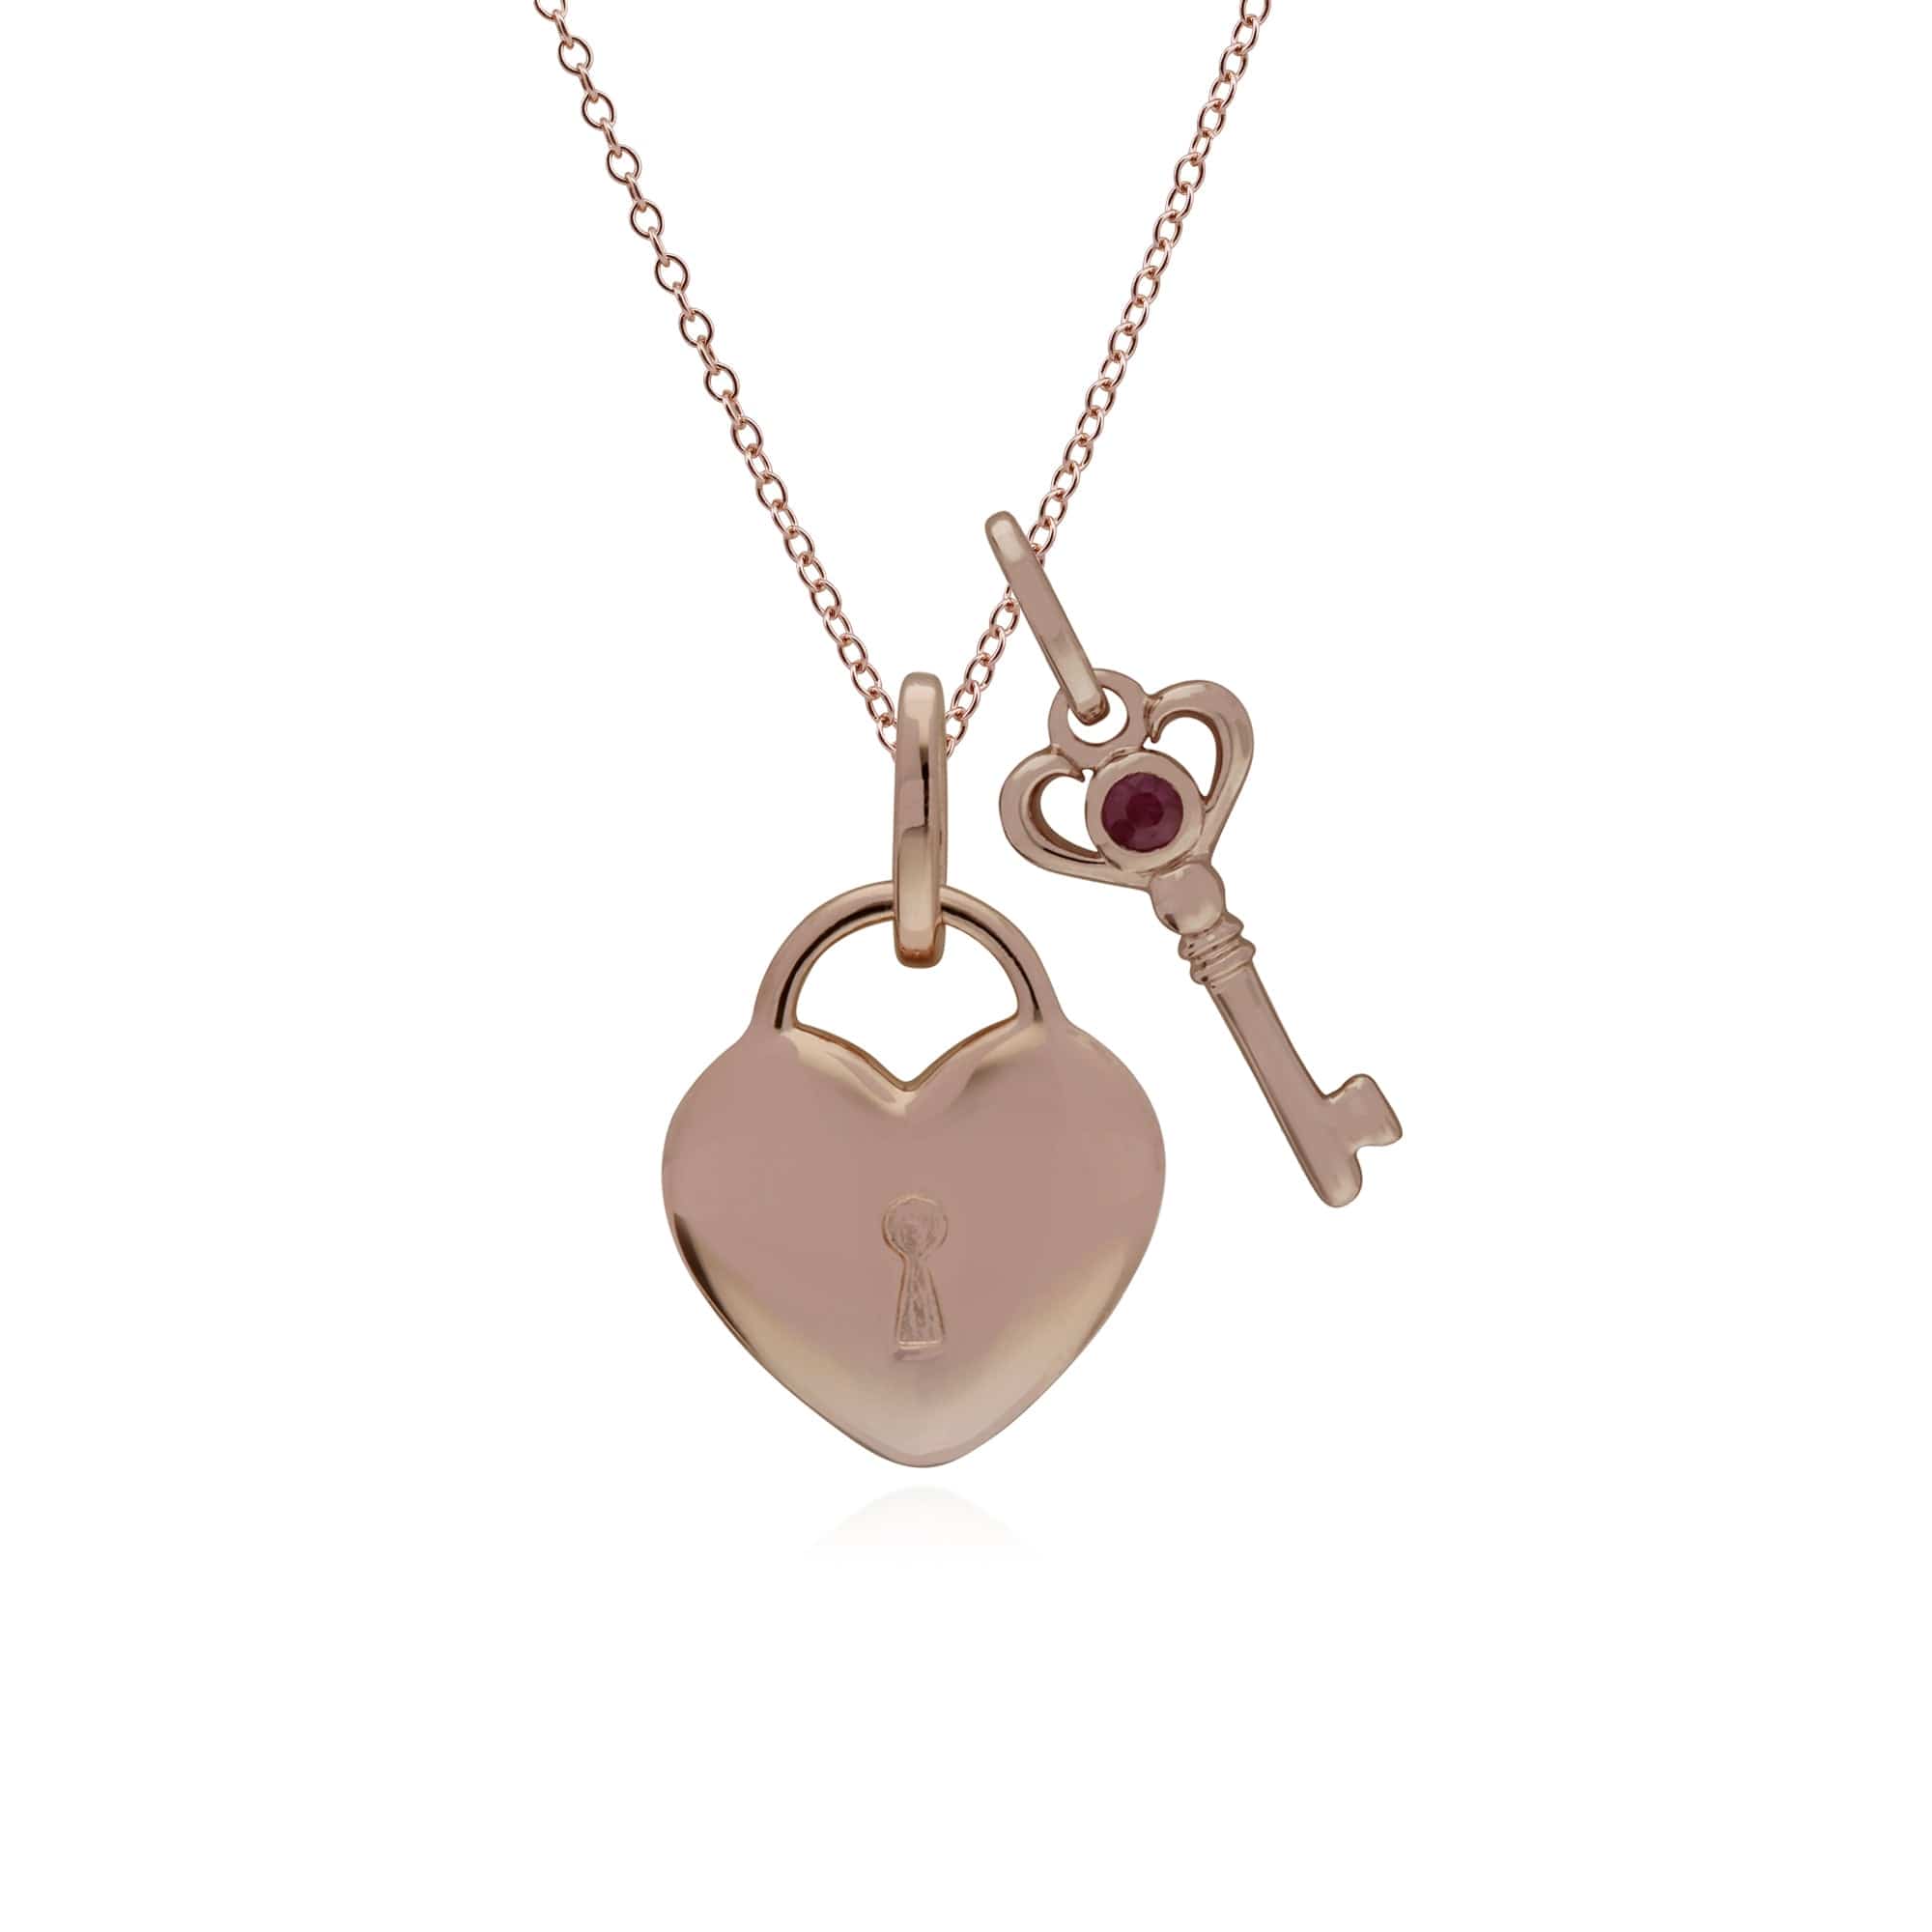 270P026301925-270P026901925 Classic Heart Lock Pendant & Ruby Key Charm in Rose Gold Plated 925 Sterling Silver 1